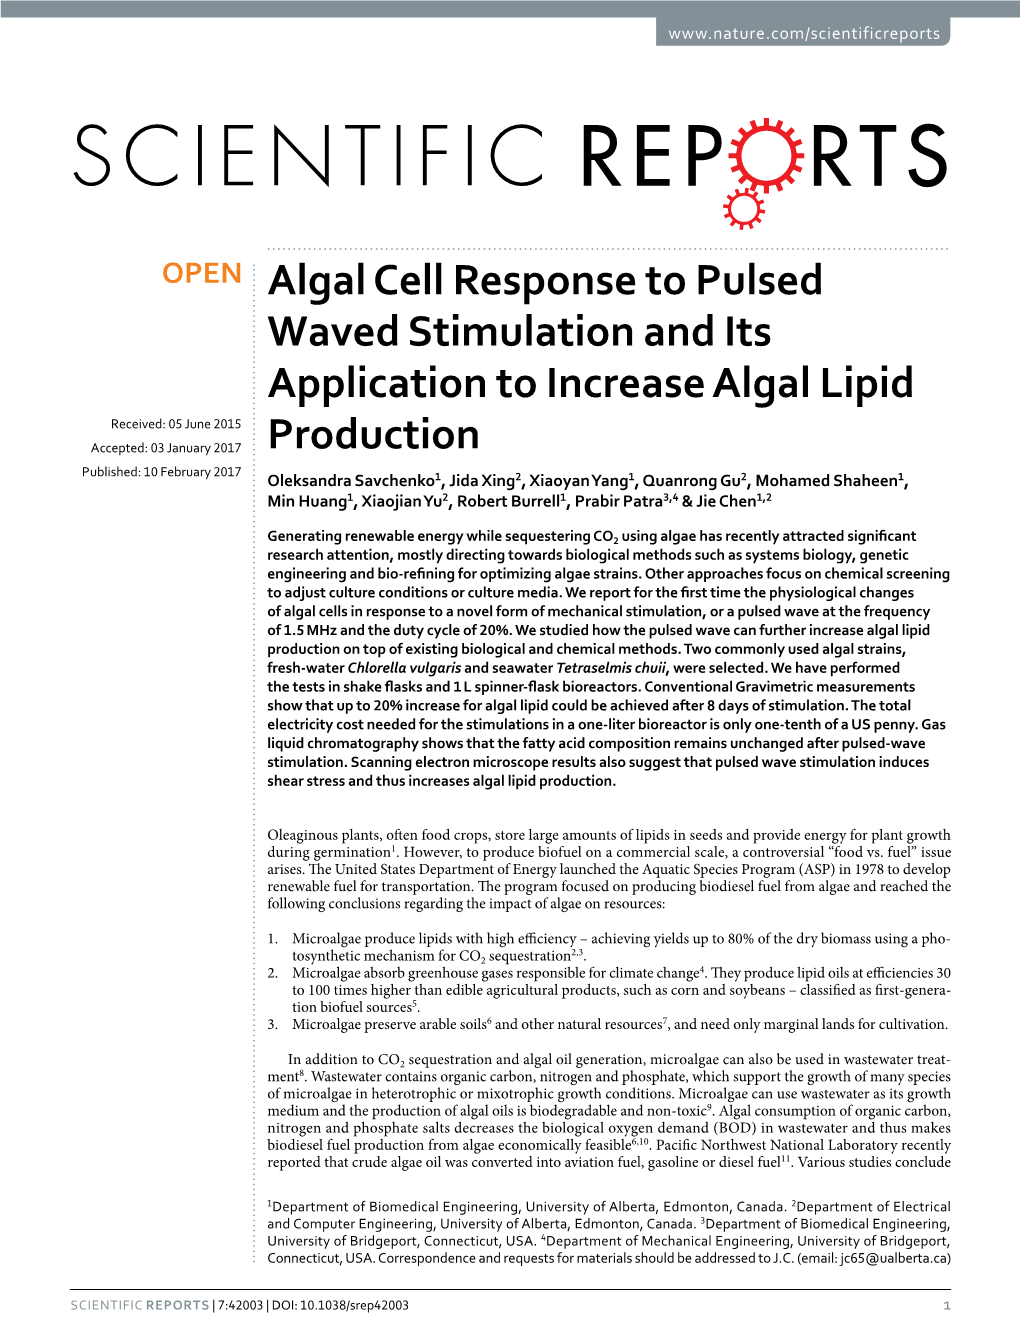 Algal Cell Response to Pulsed Waved Stimulation and Its Application To